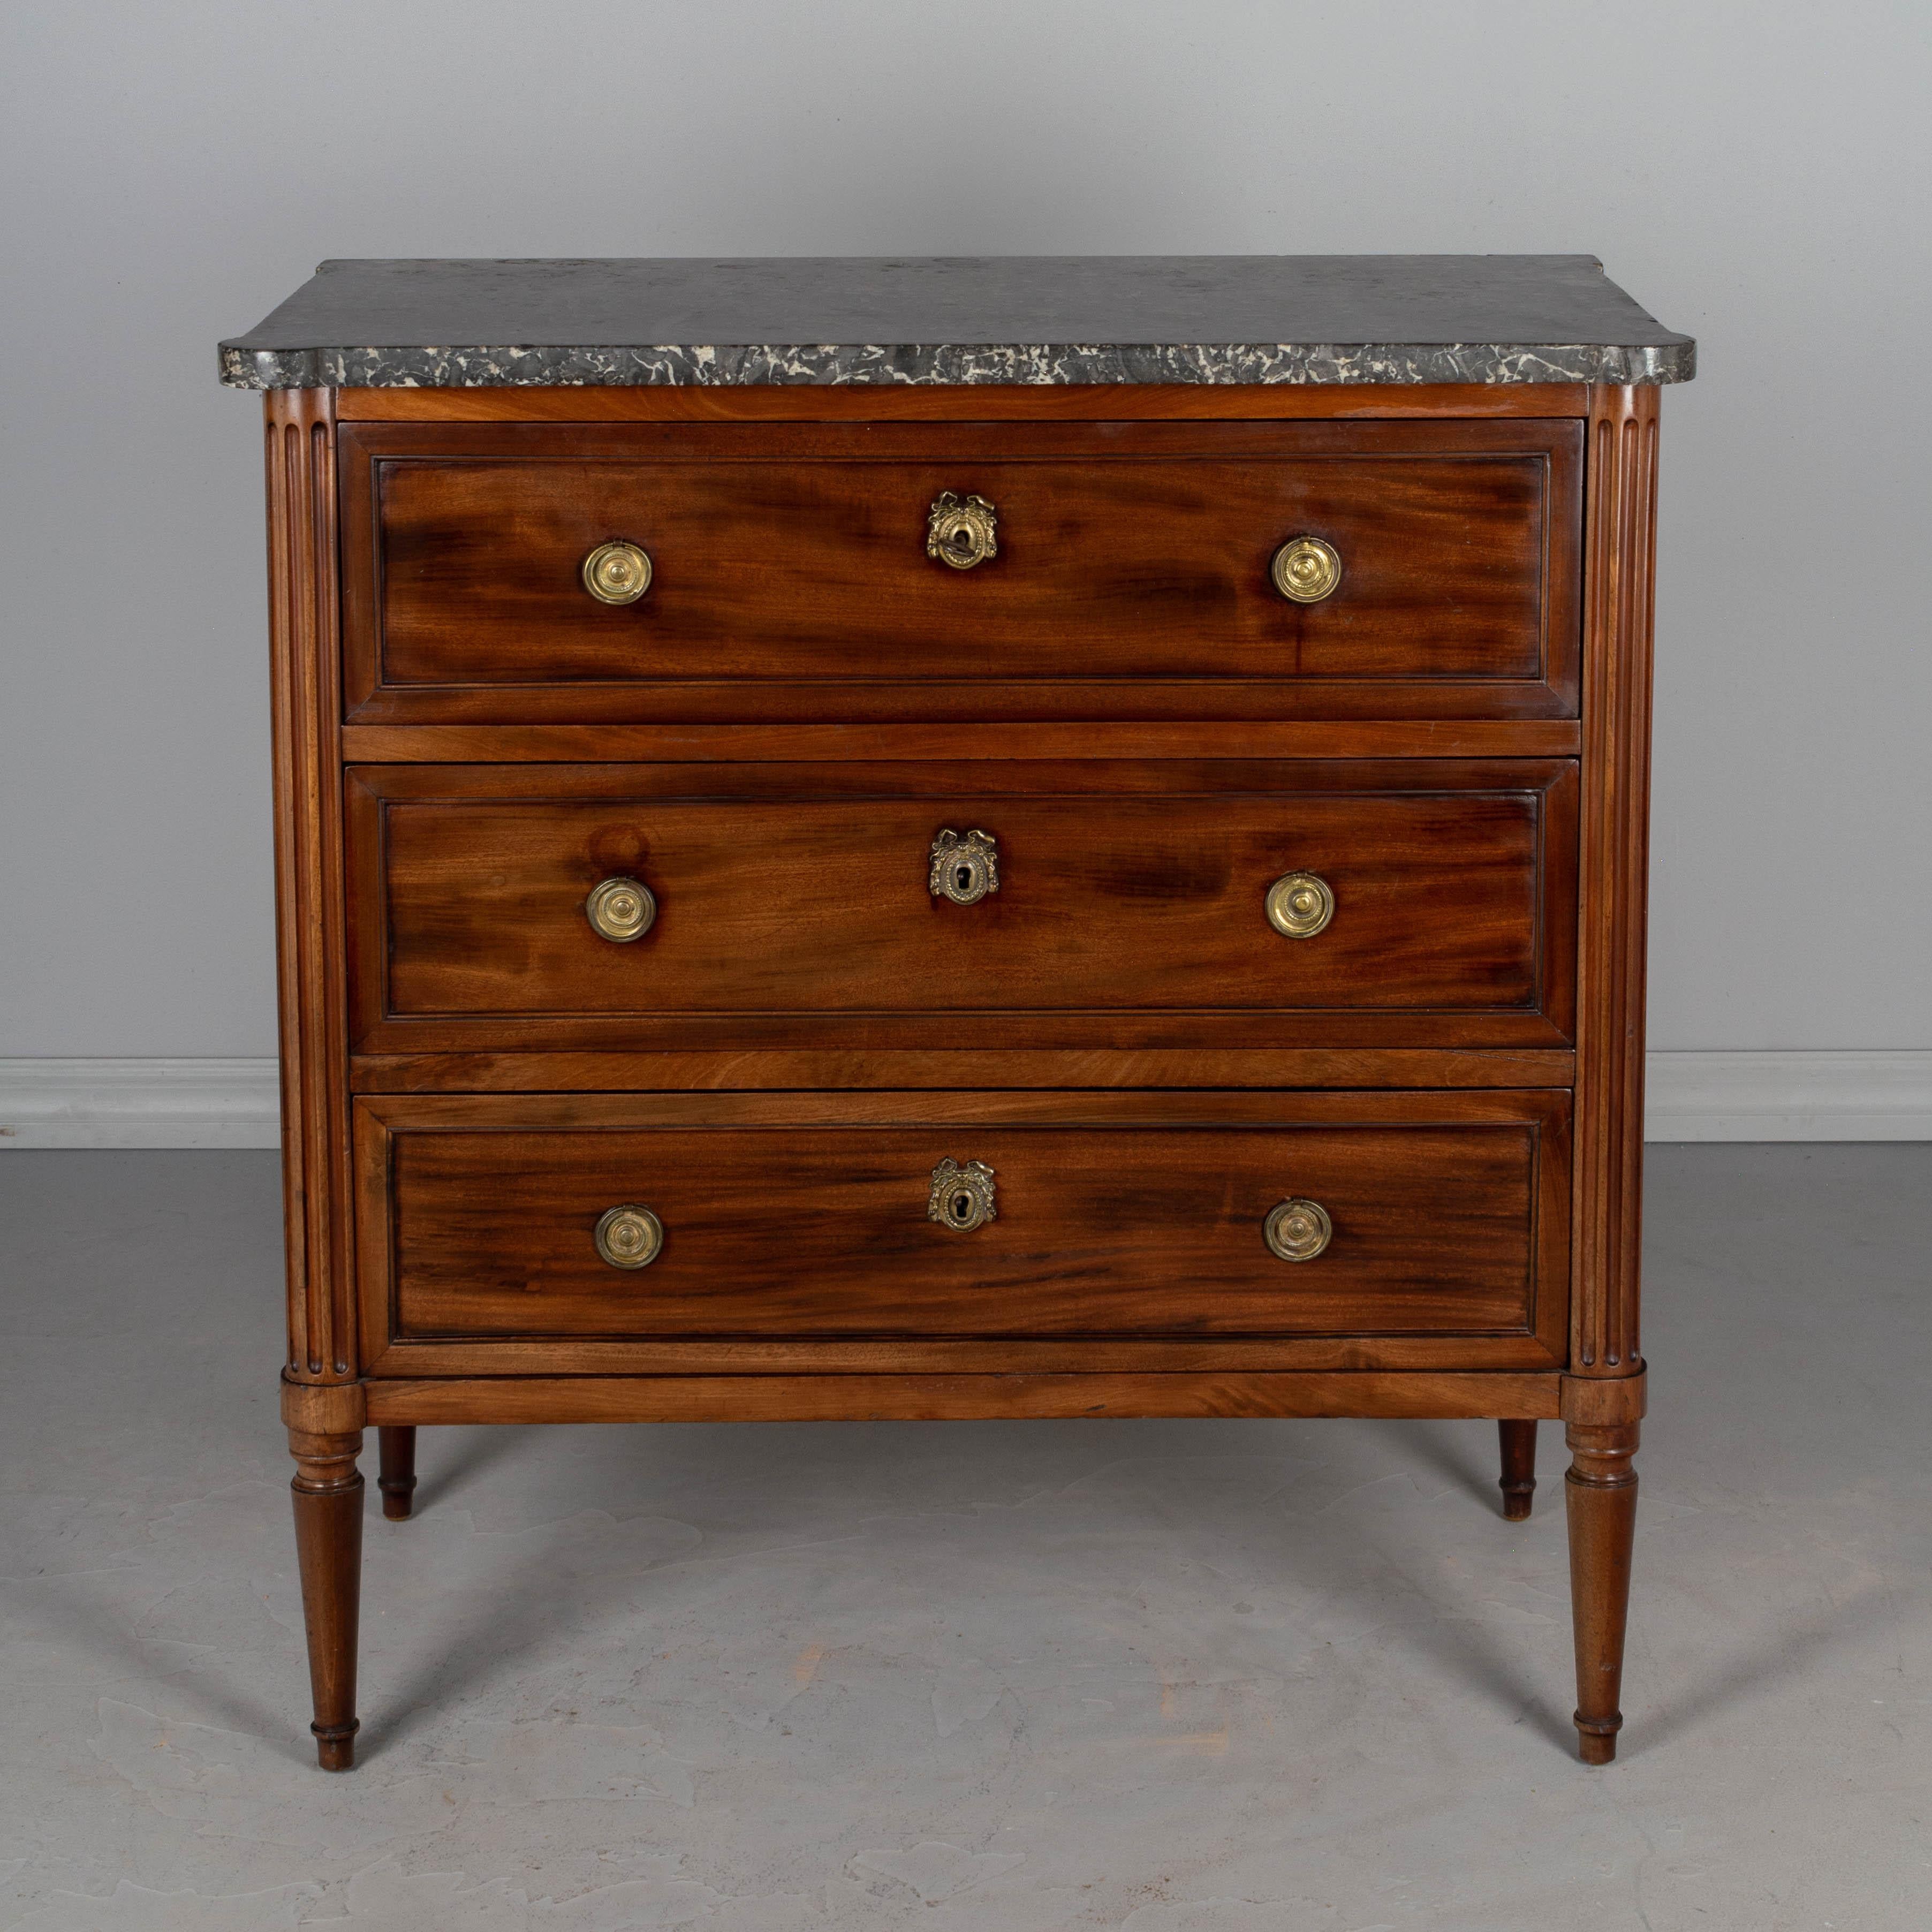 A 19th century Louis XVI style French commode, or bachelors chest, with two dovetailed drawers and a top drawer that pulls out to reveal a desk. Interior has a dark green leather writing surface and two dovetailed drawers above two false drawers.